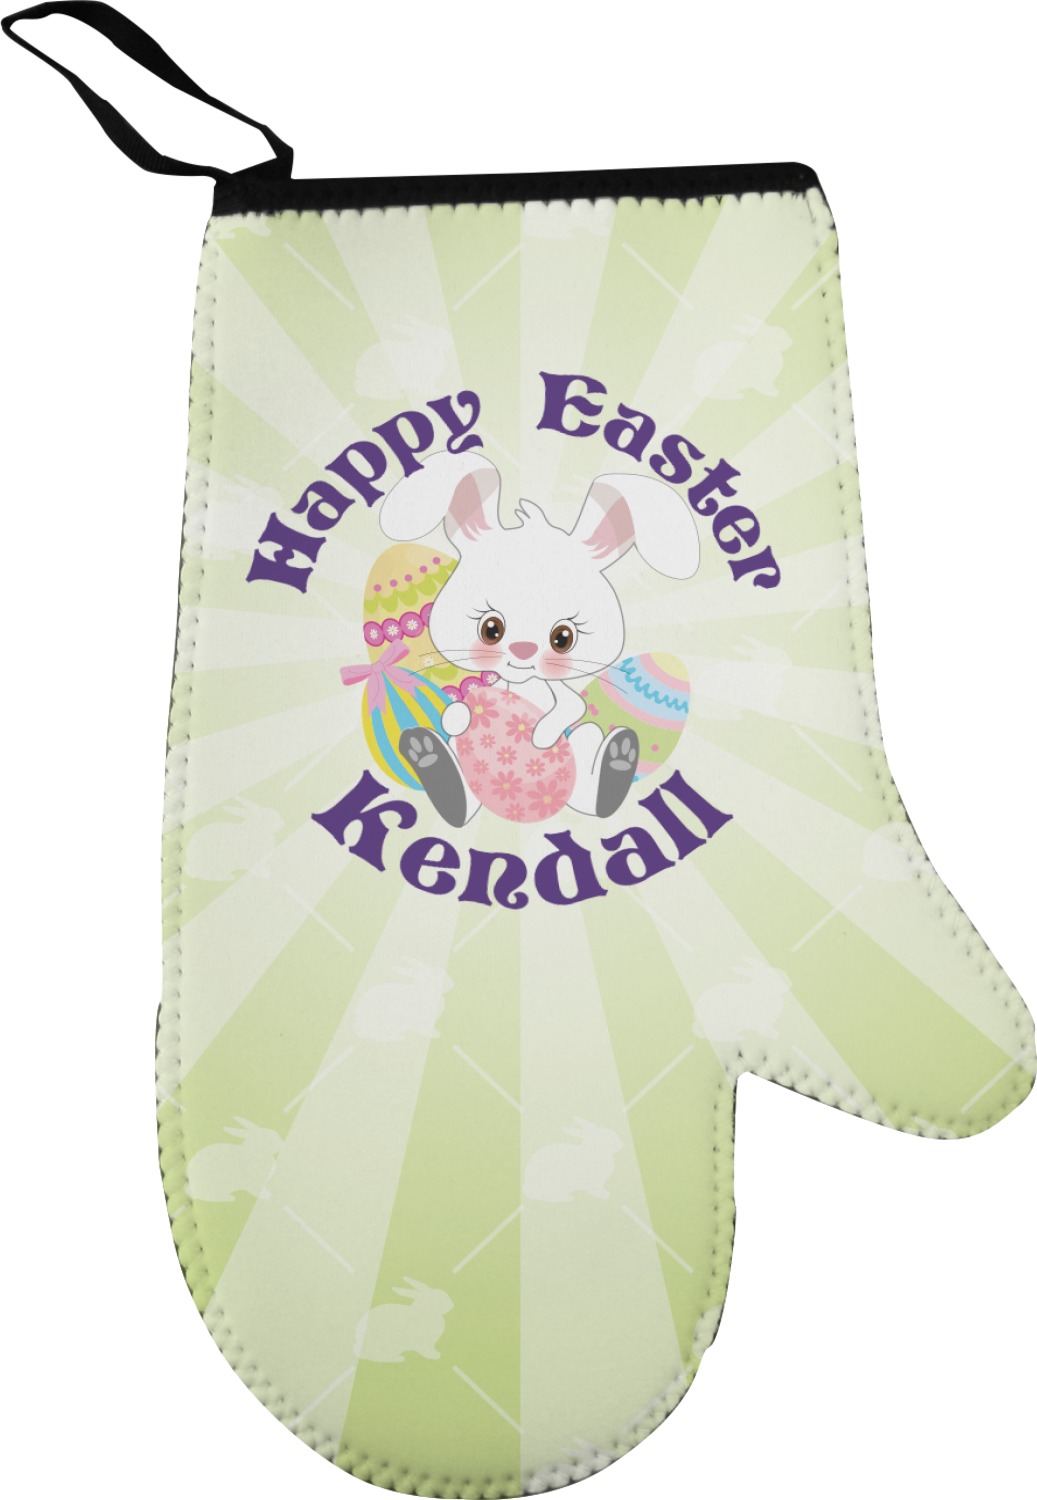 https://www.youcustomizeit.com/common/MAKE/591604/Easter-Bunny-Personalized-Oven-Mitt.jpg?lm=1553808414